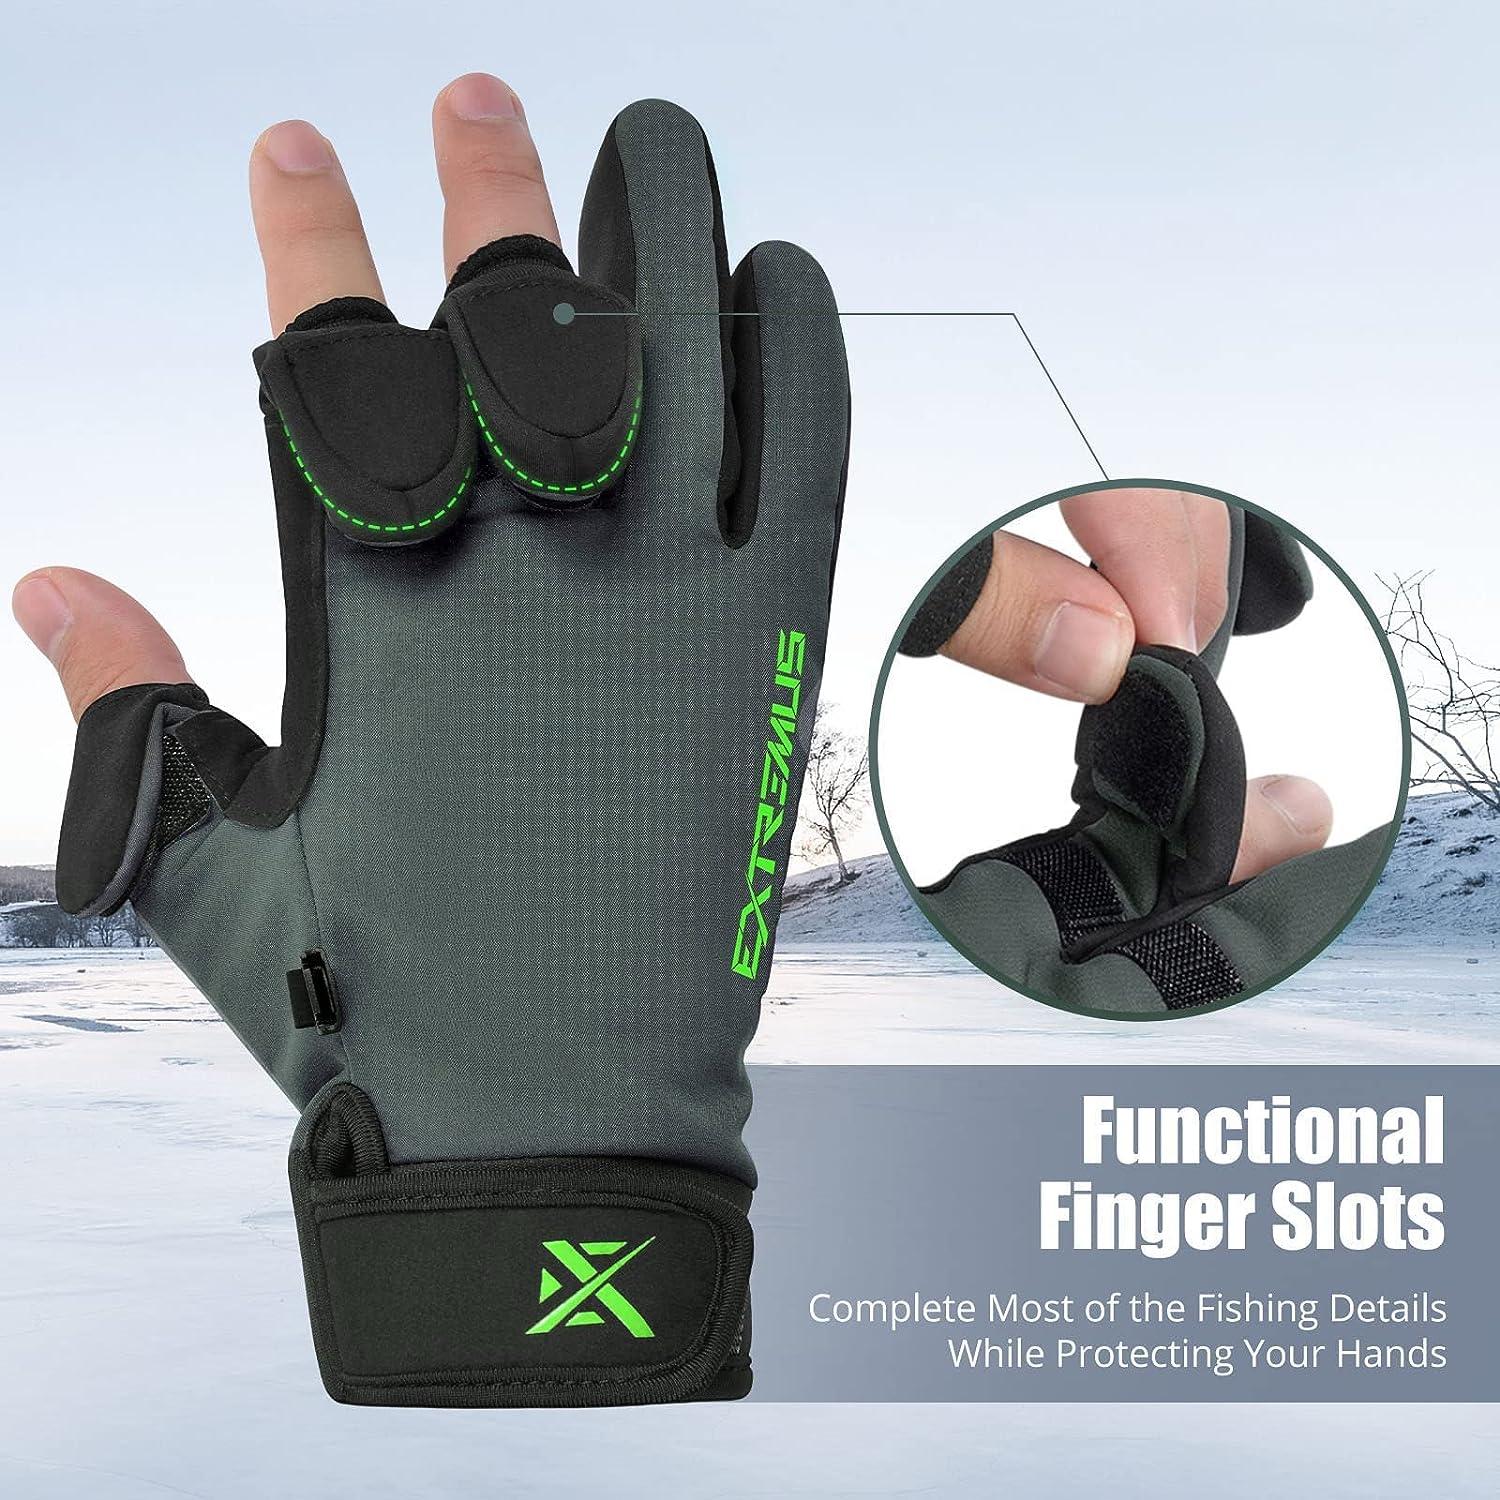 Extremus Buckwell Winter Gloves - Touchscreen Water Resistant Warm Fishing  Gloves for Cold Weather - Men and Womens Gloves for Ice Fishing,  Photography, or Hunting Gray Large